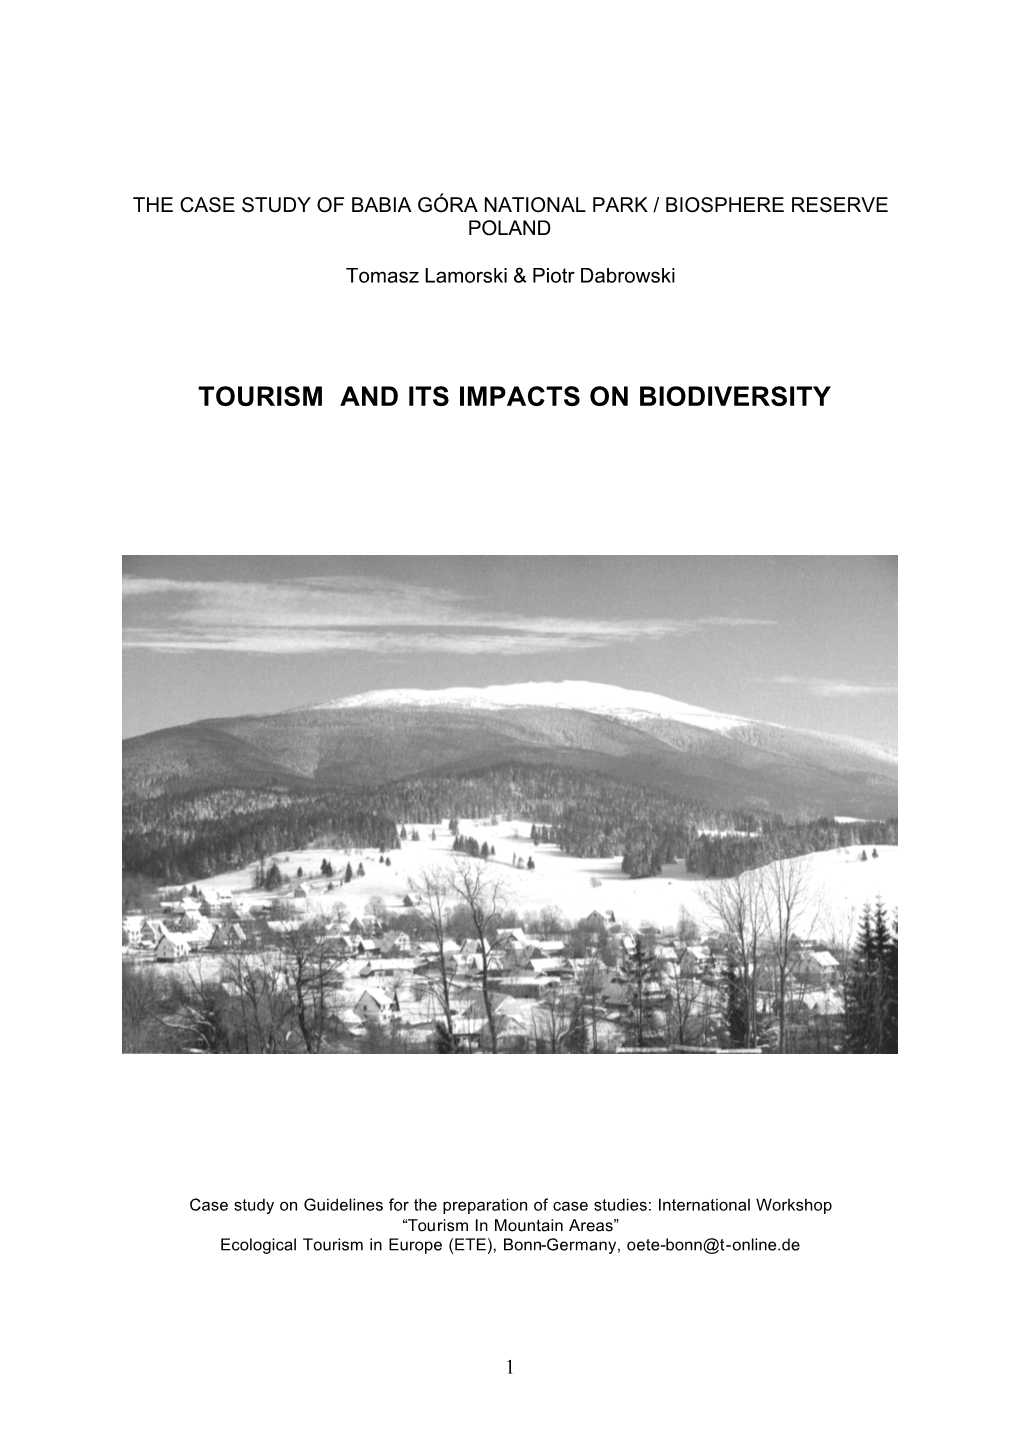 Tourism and Its Impacts on Biodiversity